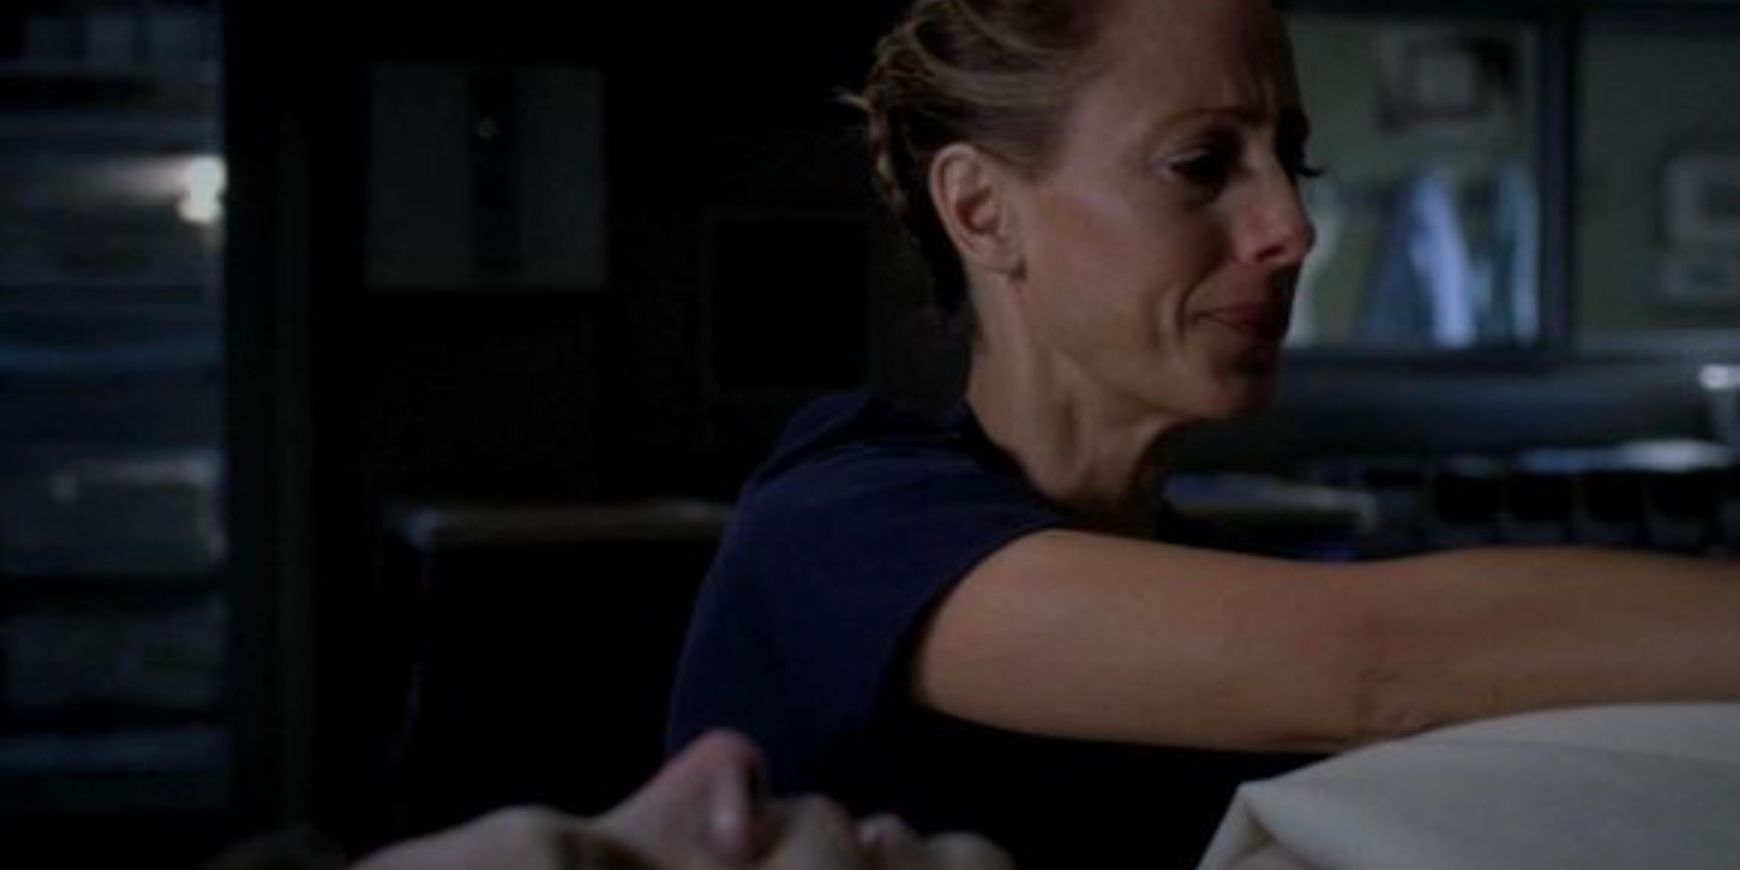 Teddy cries while covering Henry's body in Grey's Anatomy